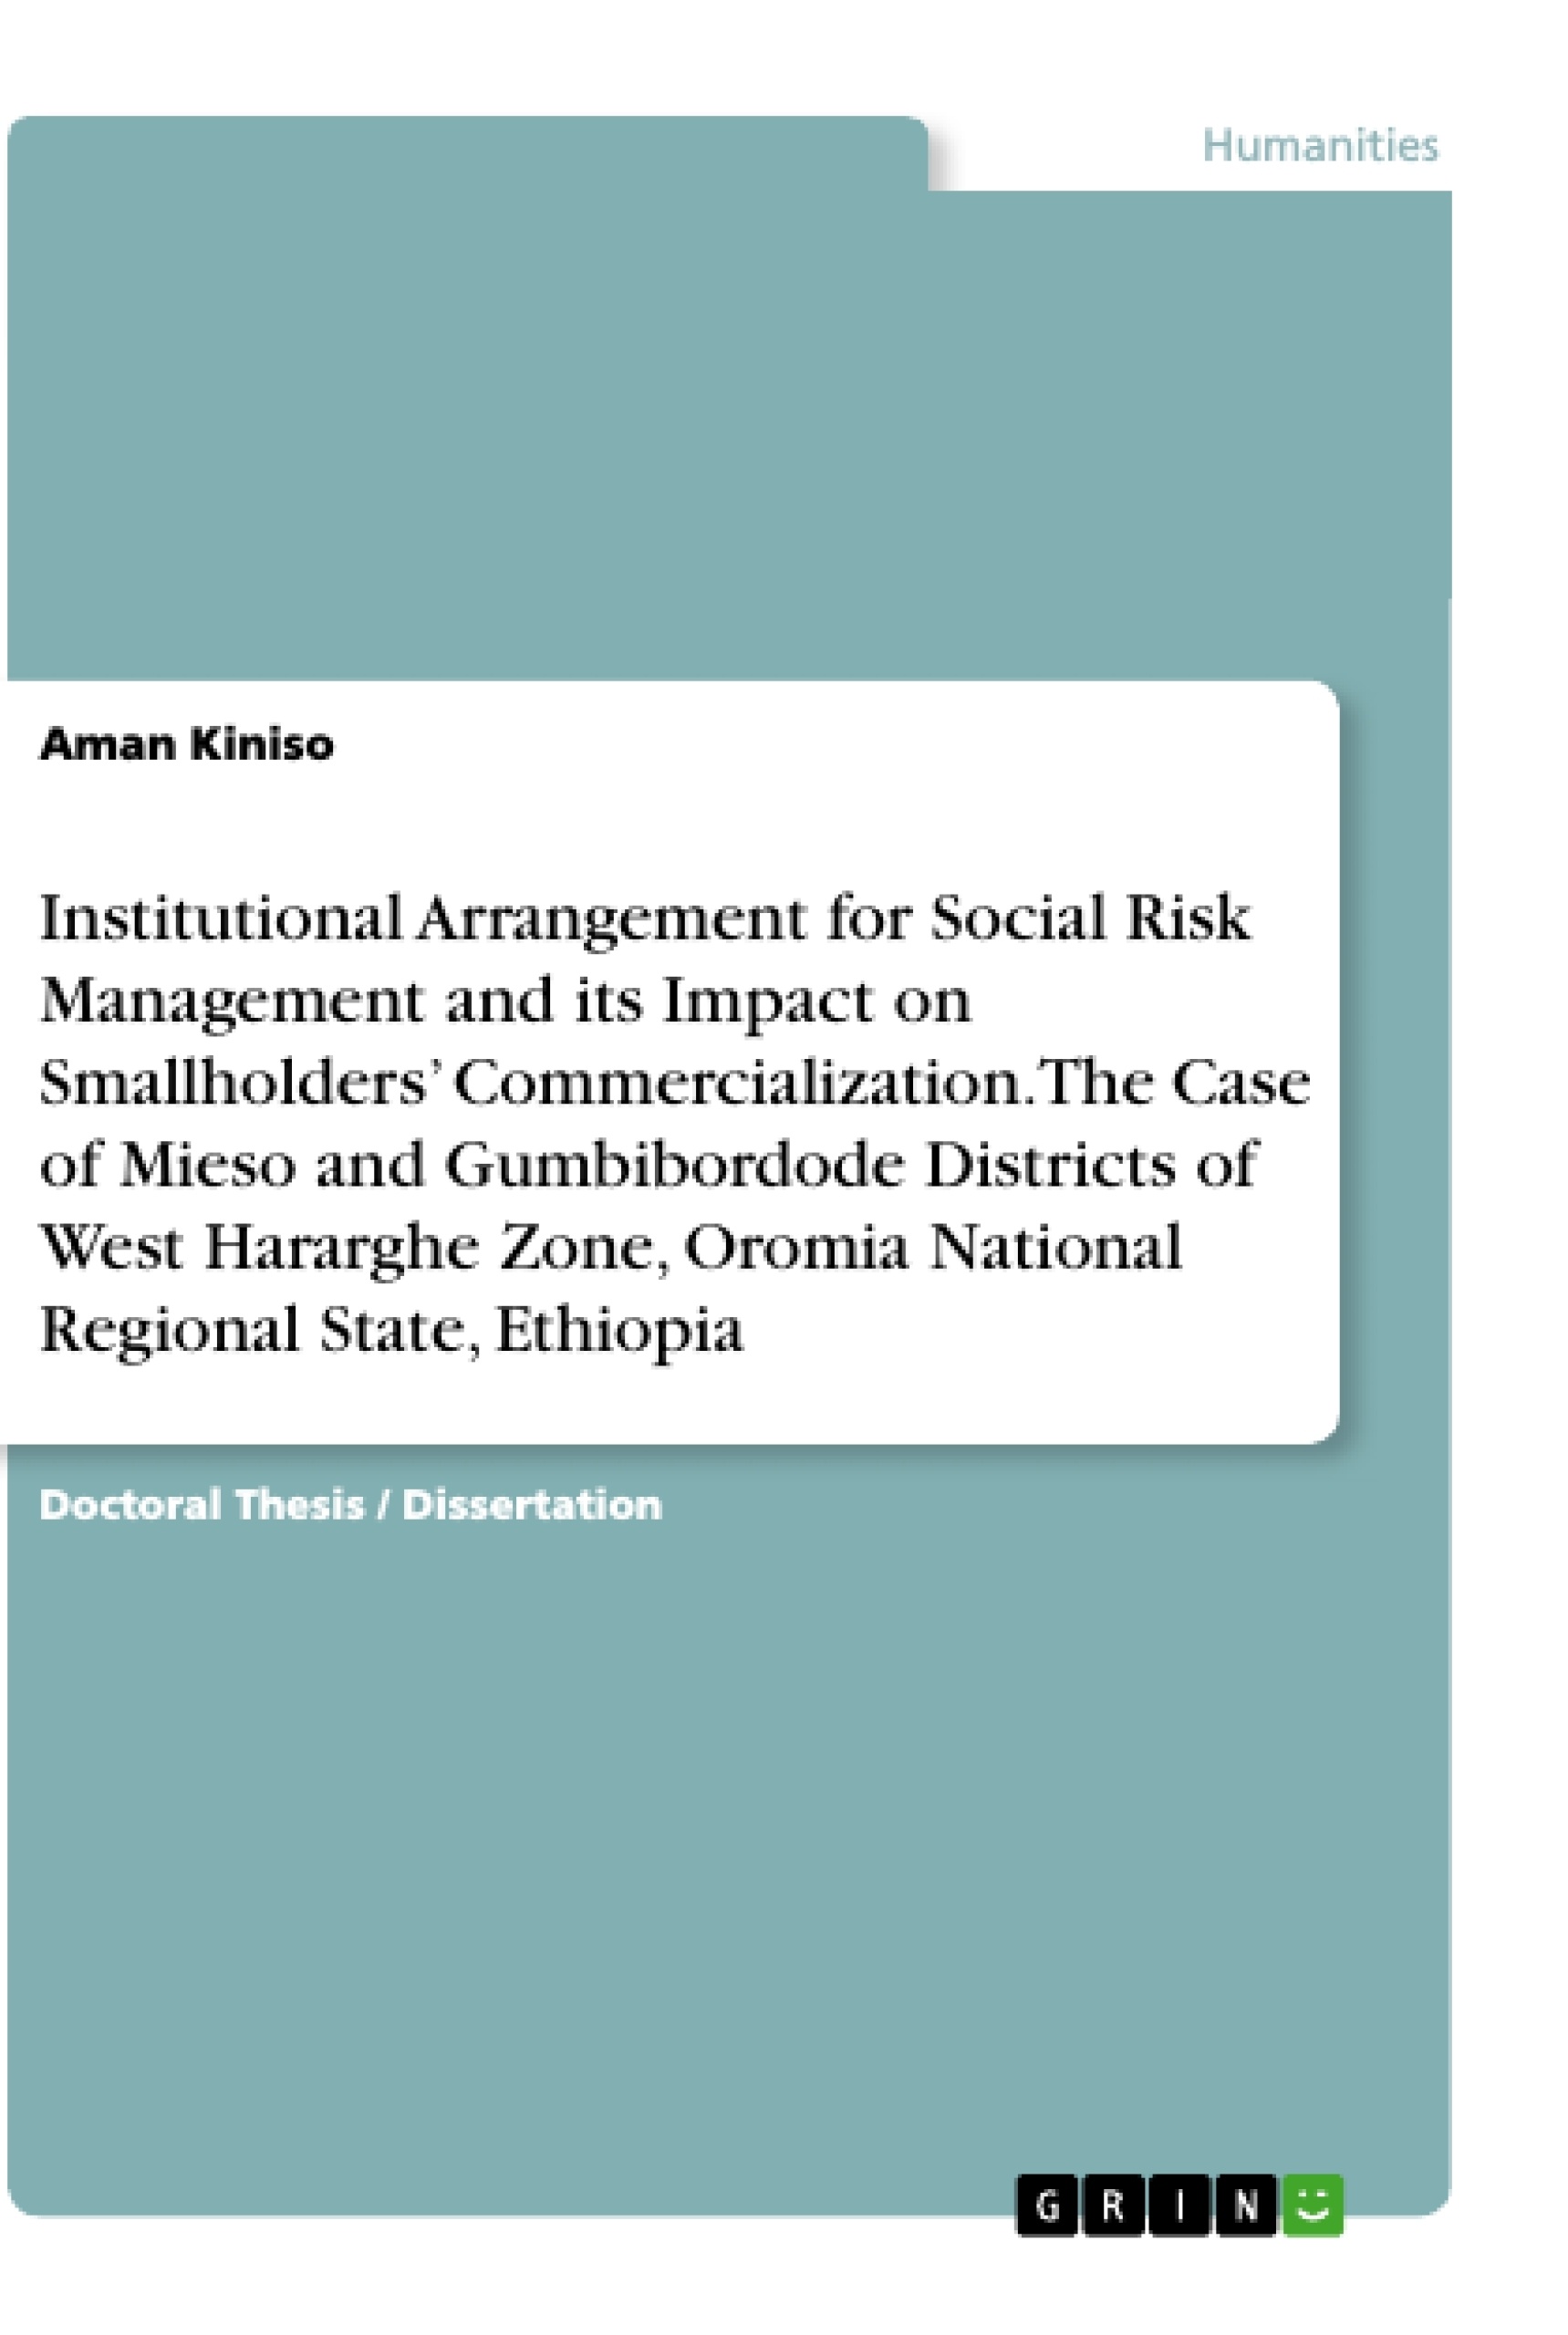 Title: Institutional Arrangement for Social Risk Management and its Impact on Smallholders’ Commercialization. The Case of Mieso and Gumbibordode Districts of West Hararghe Zone, Oromia National Regional State, Ethiopia